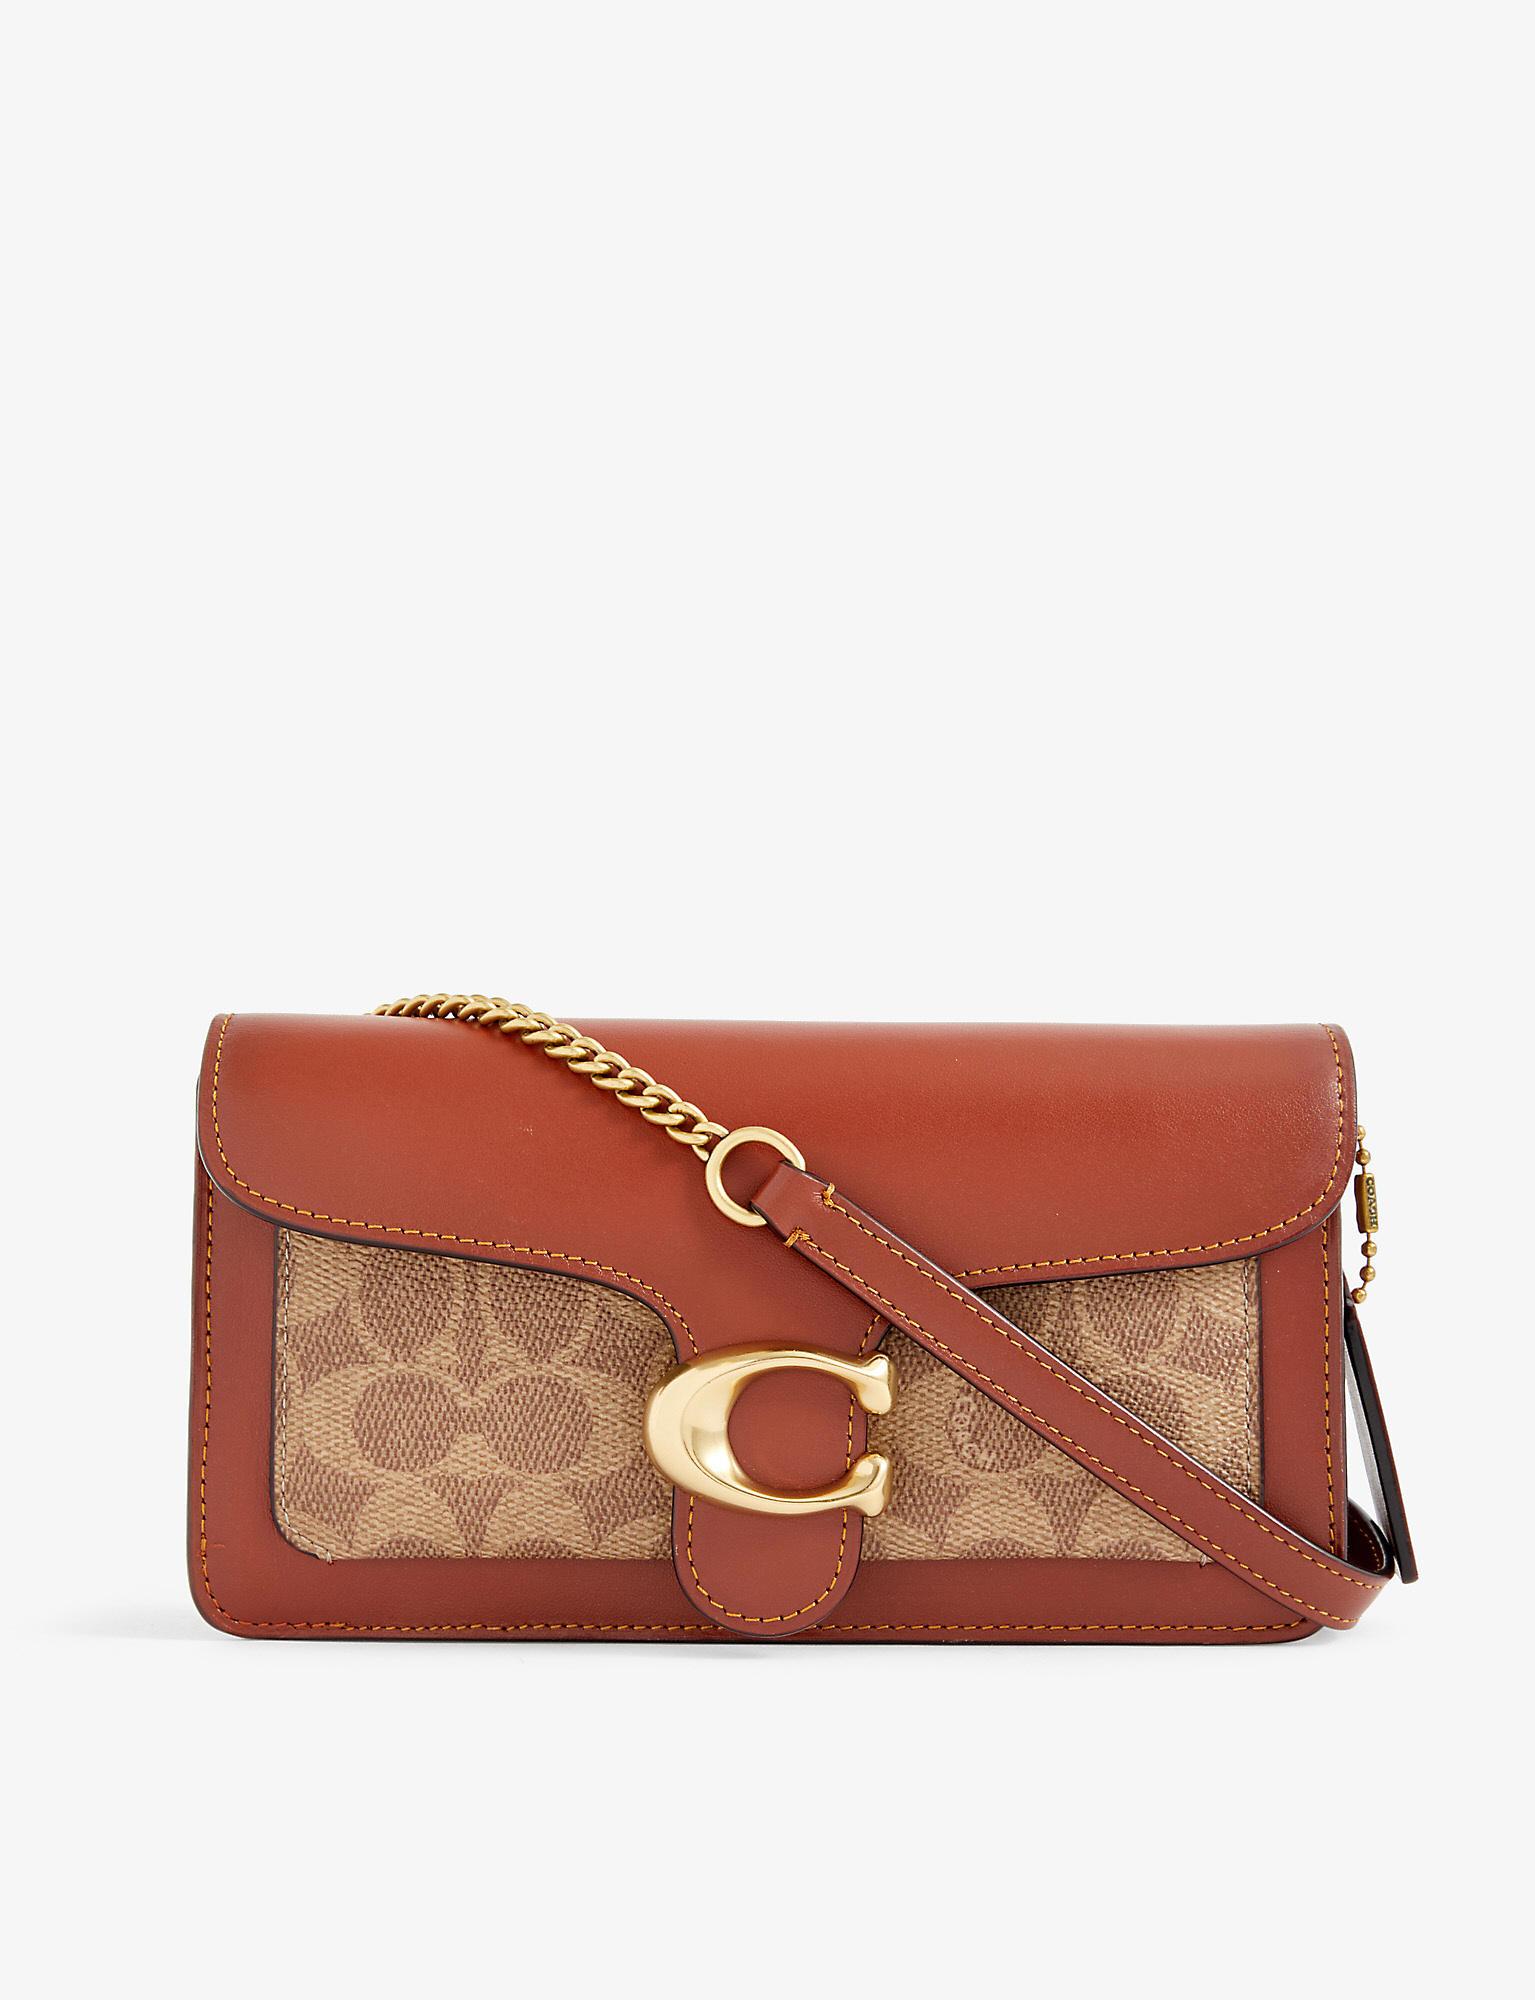 COACH Tabby Leather And Coated Canvas Cross-body Bag in b4/Tan Rust ...